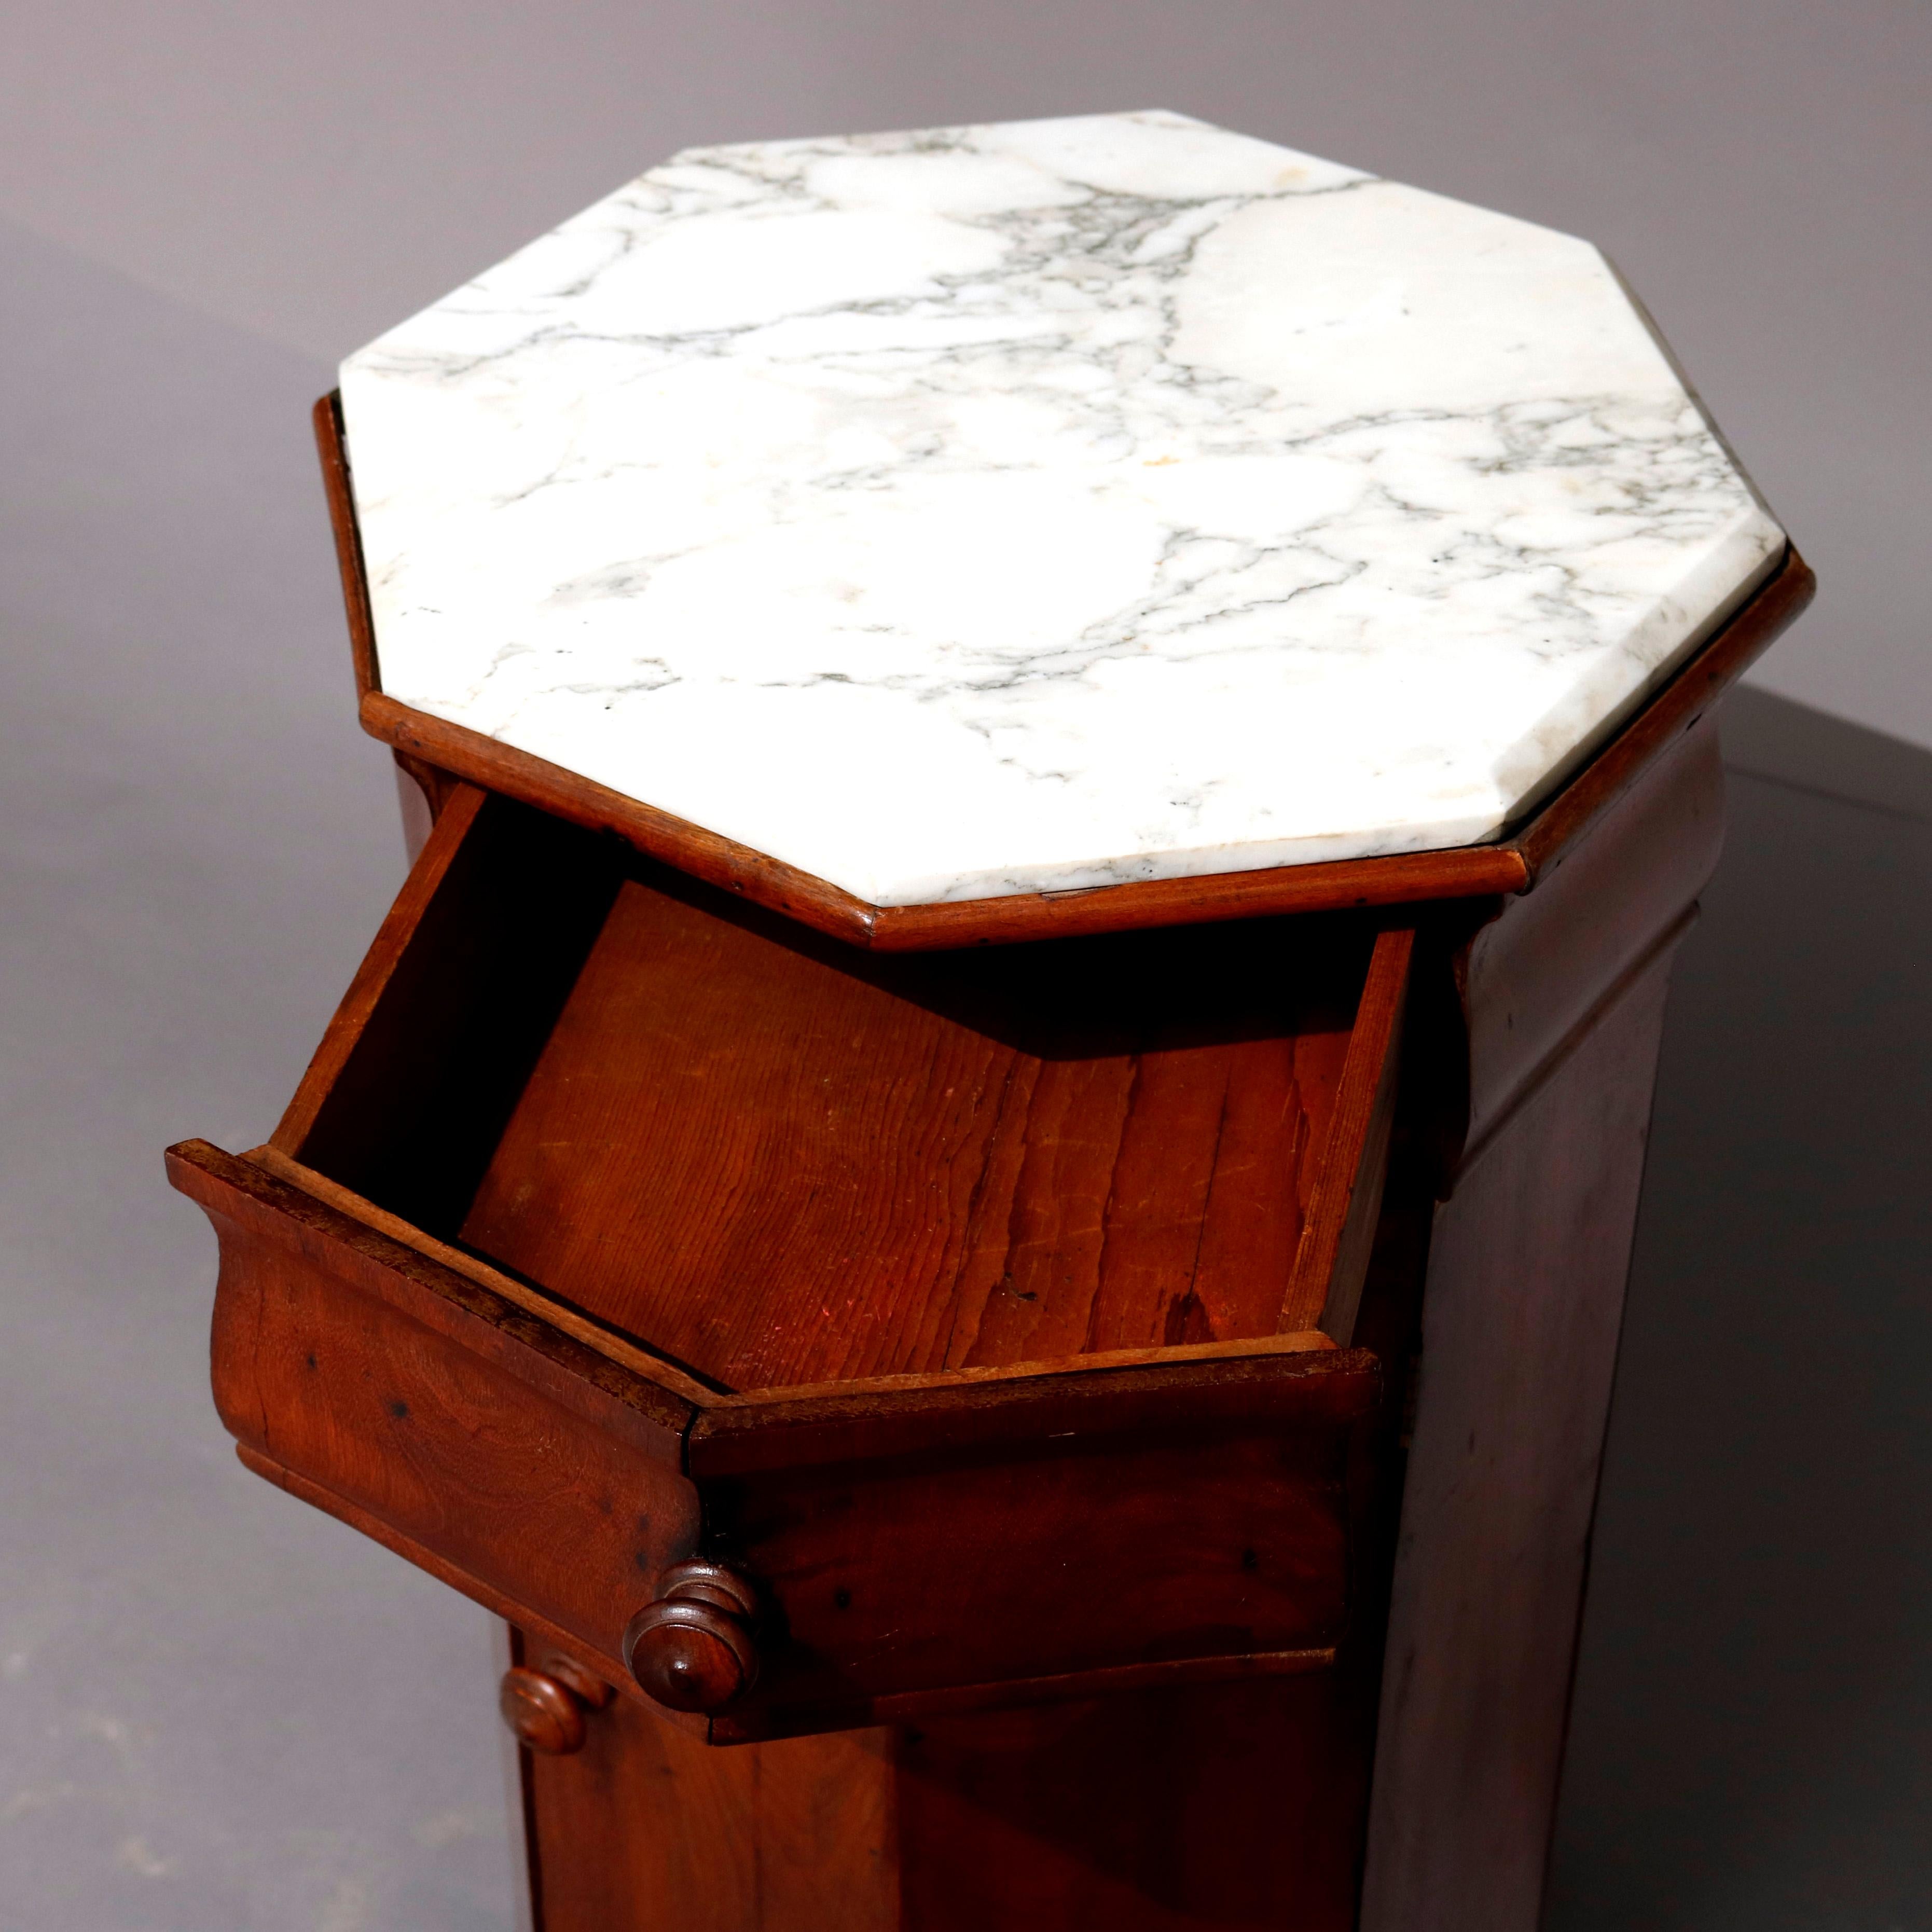 An antique classical American Empire marble-top cellarette offers flame mahogany construction in faceted octagonal form with single frieze drawer surmounting single door cabinet with shelved interior, circa 1800

Measures: 32